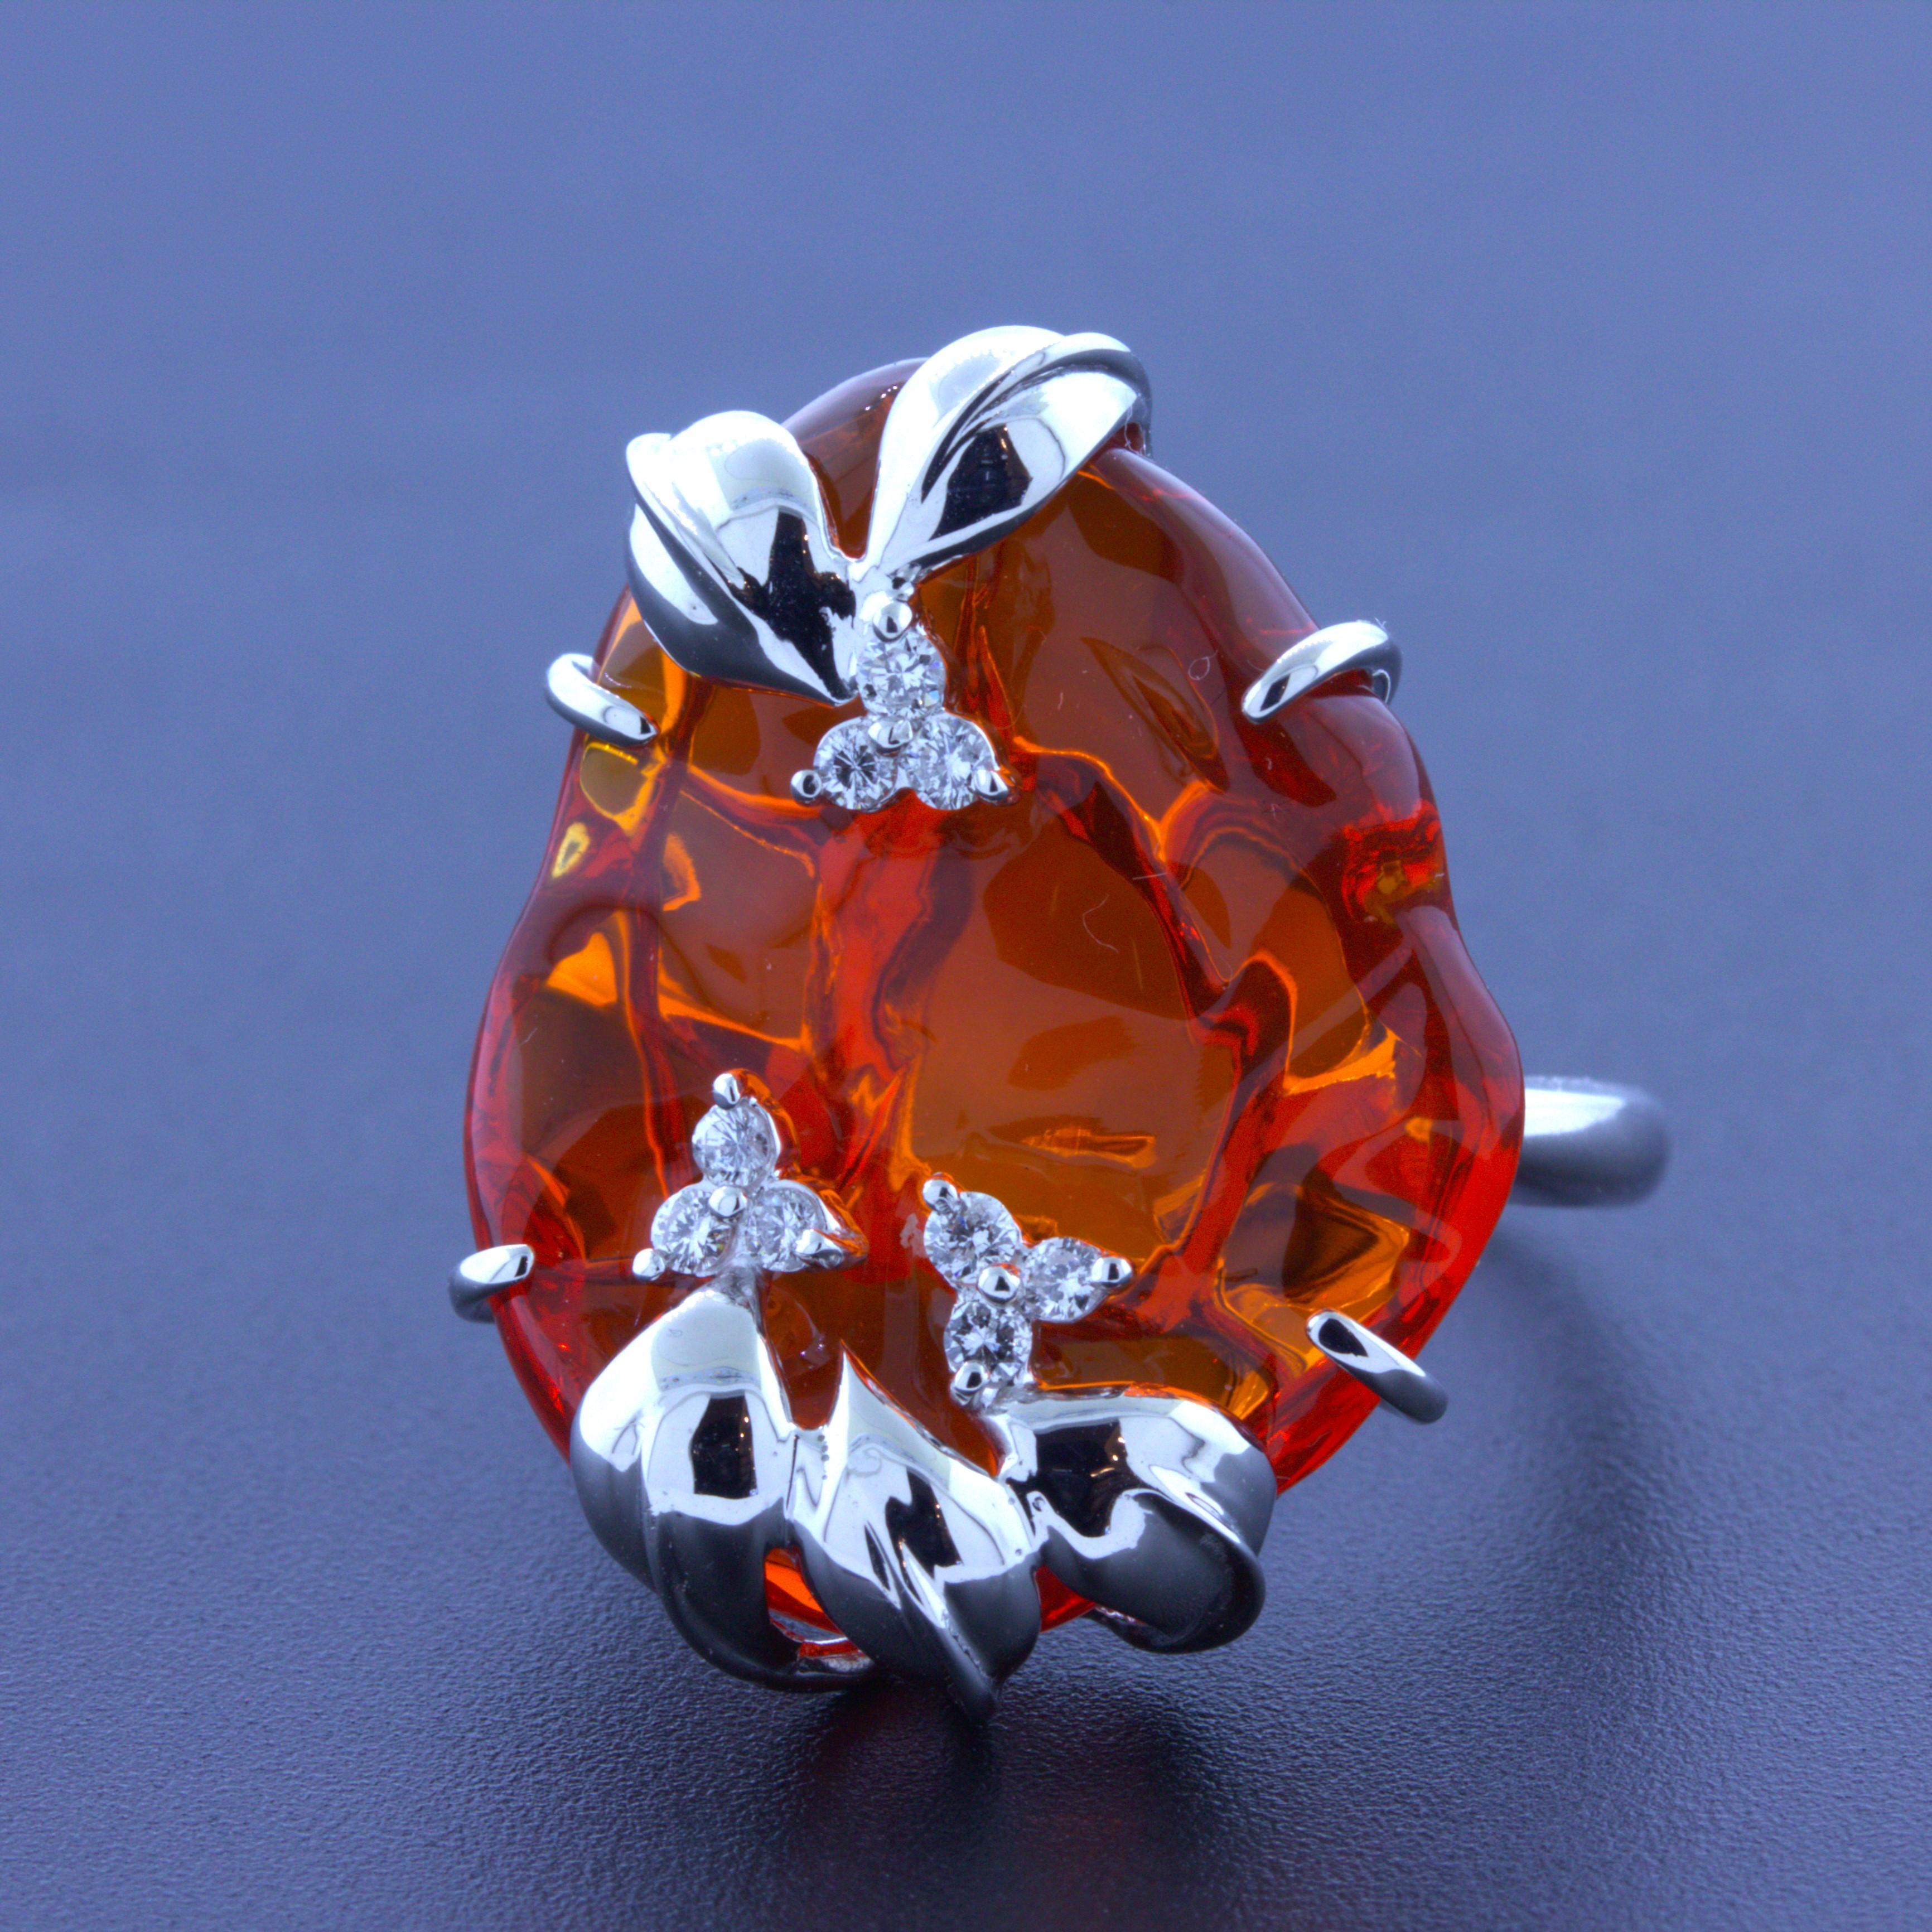 A unique and stylish 18k white gold ring featuring a large 18.25 carat Mexican fire opal! It has been hand-polished to a smooth free-form shape and has a rich and bright deep jelly orange color that is mesmerizing. It is completed by 0.17 carats of